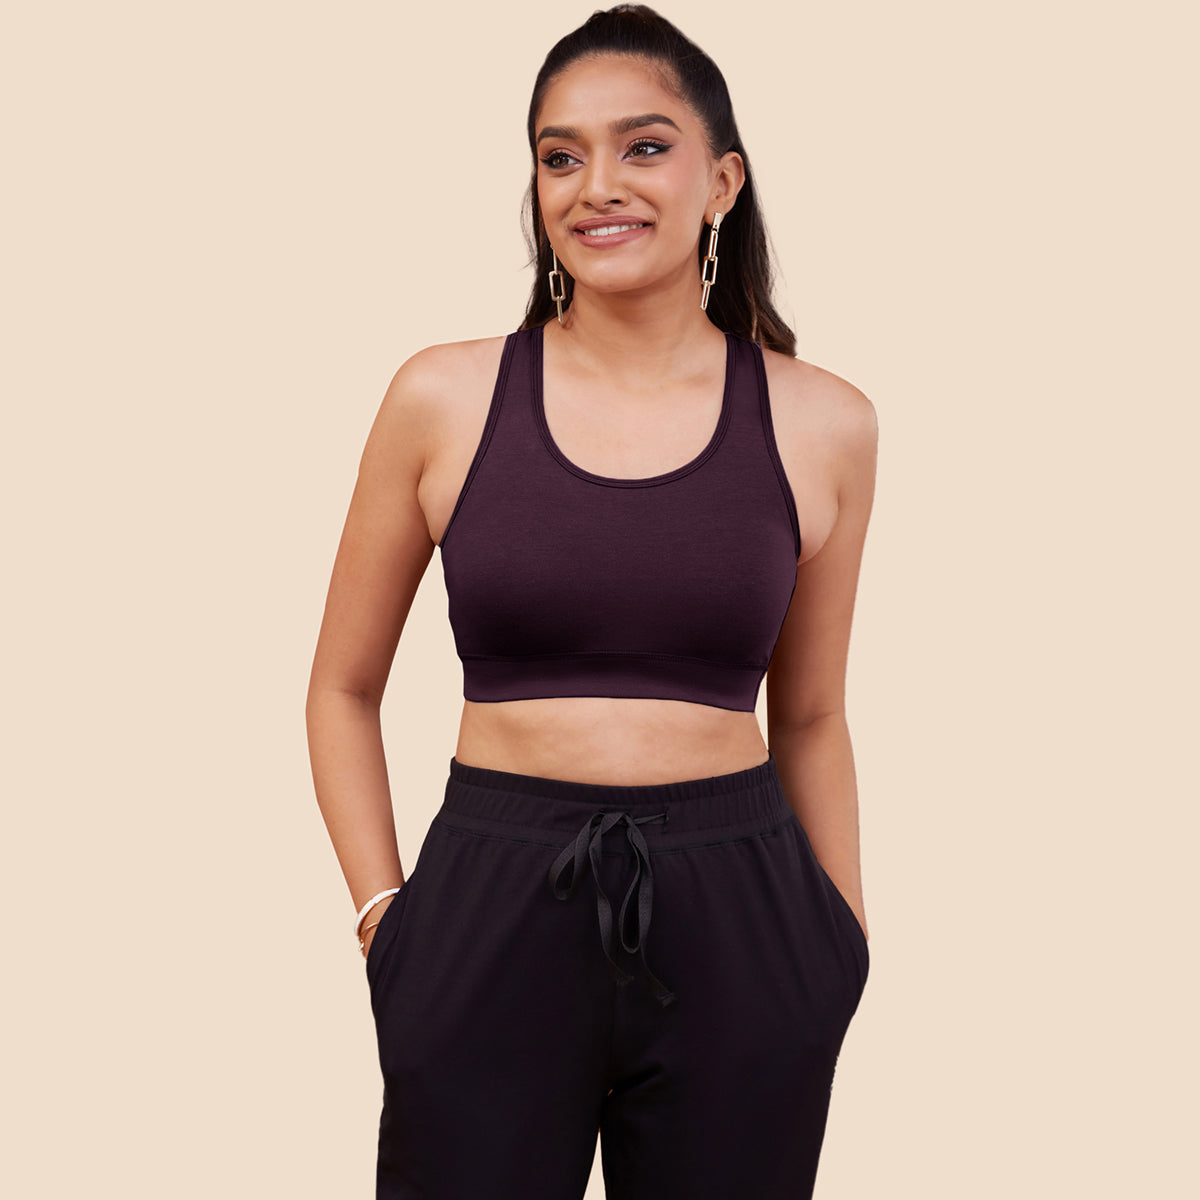 Nykd by Nykaa Essential Cotton Sports Bra , Nykd All Day-NYK 059 - Black